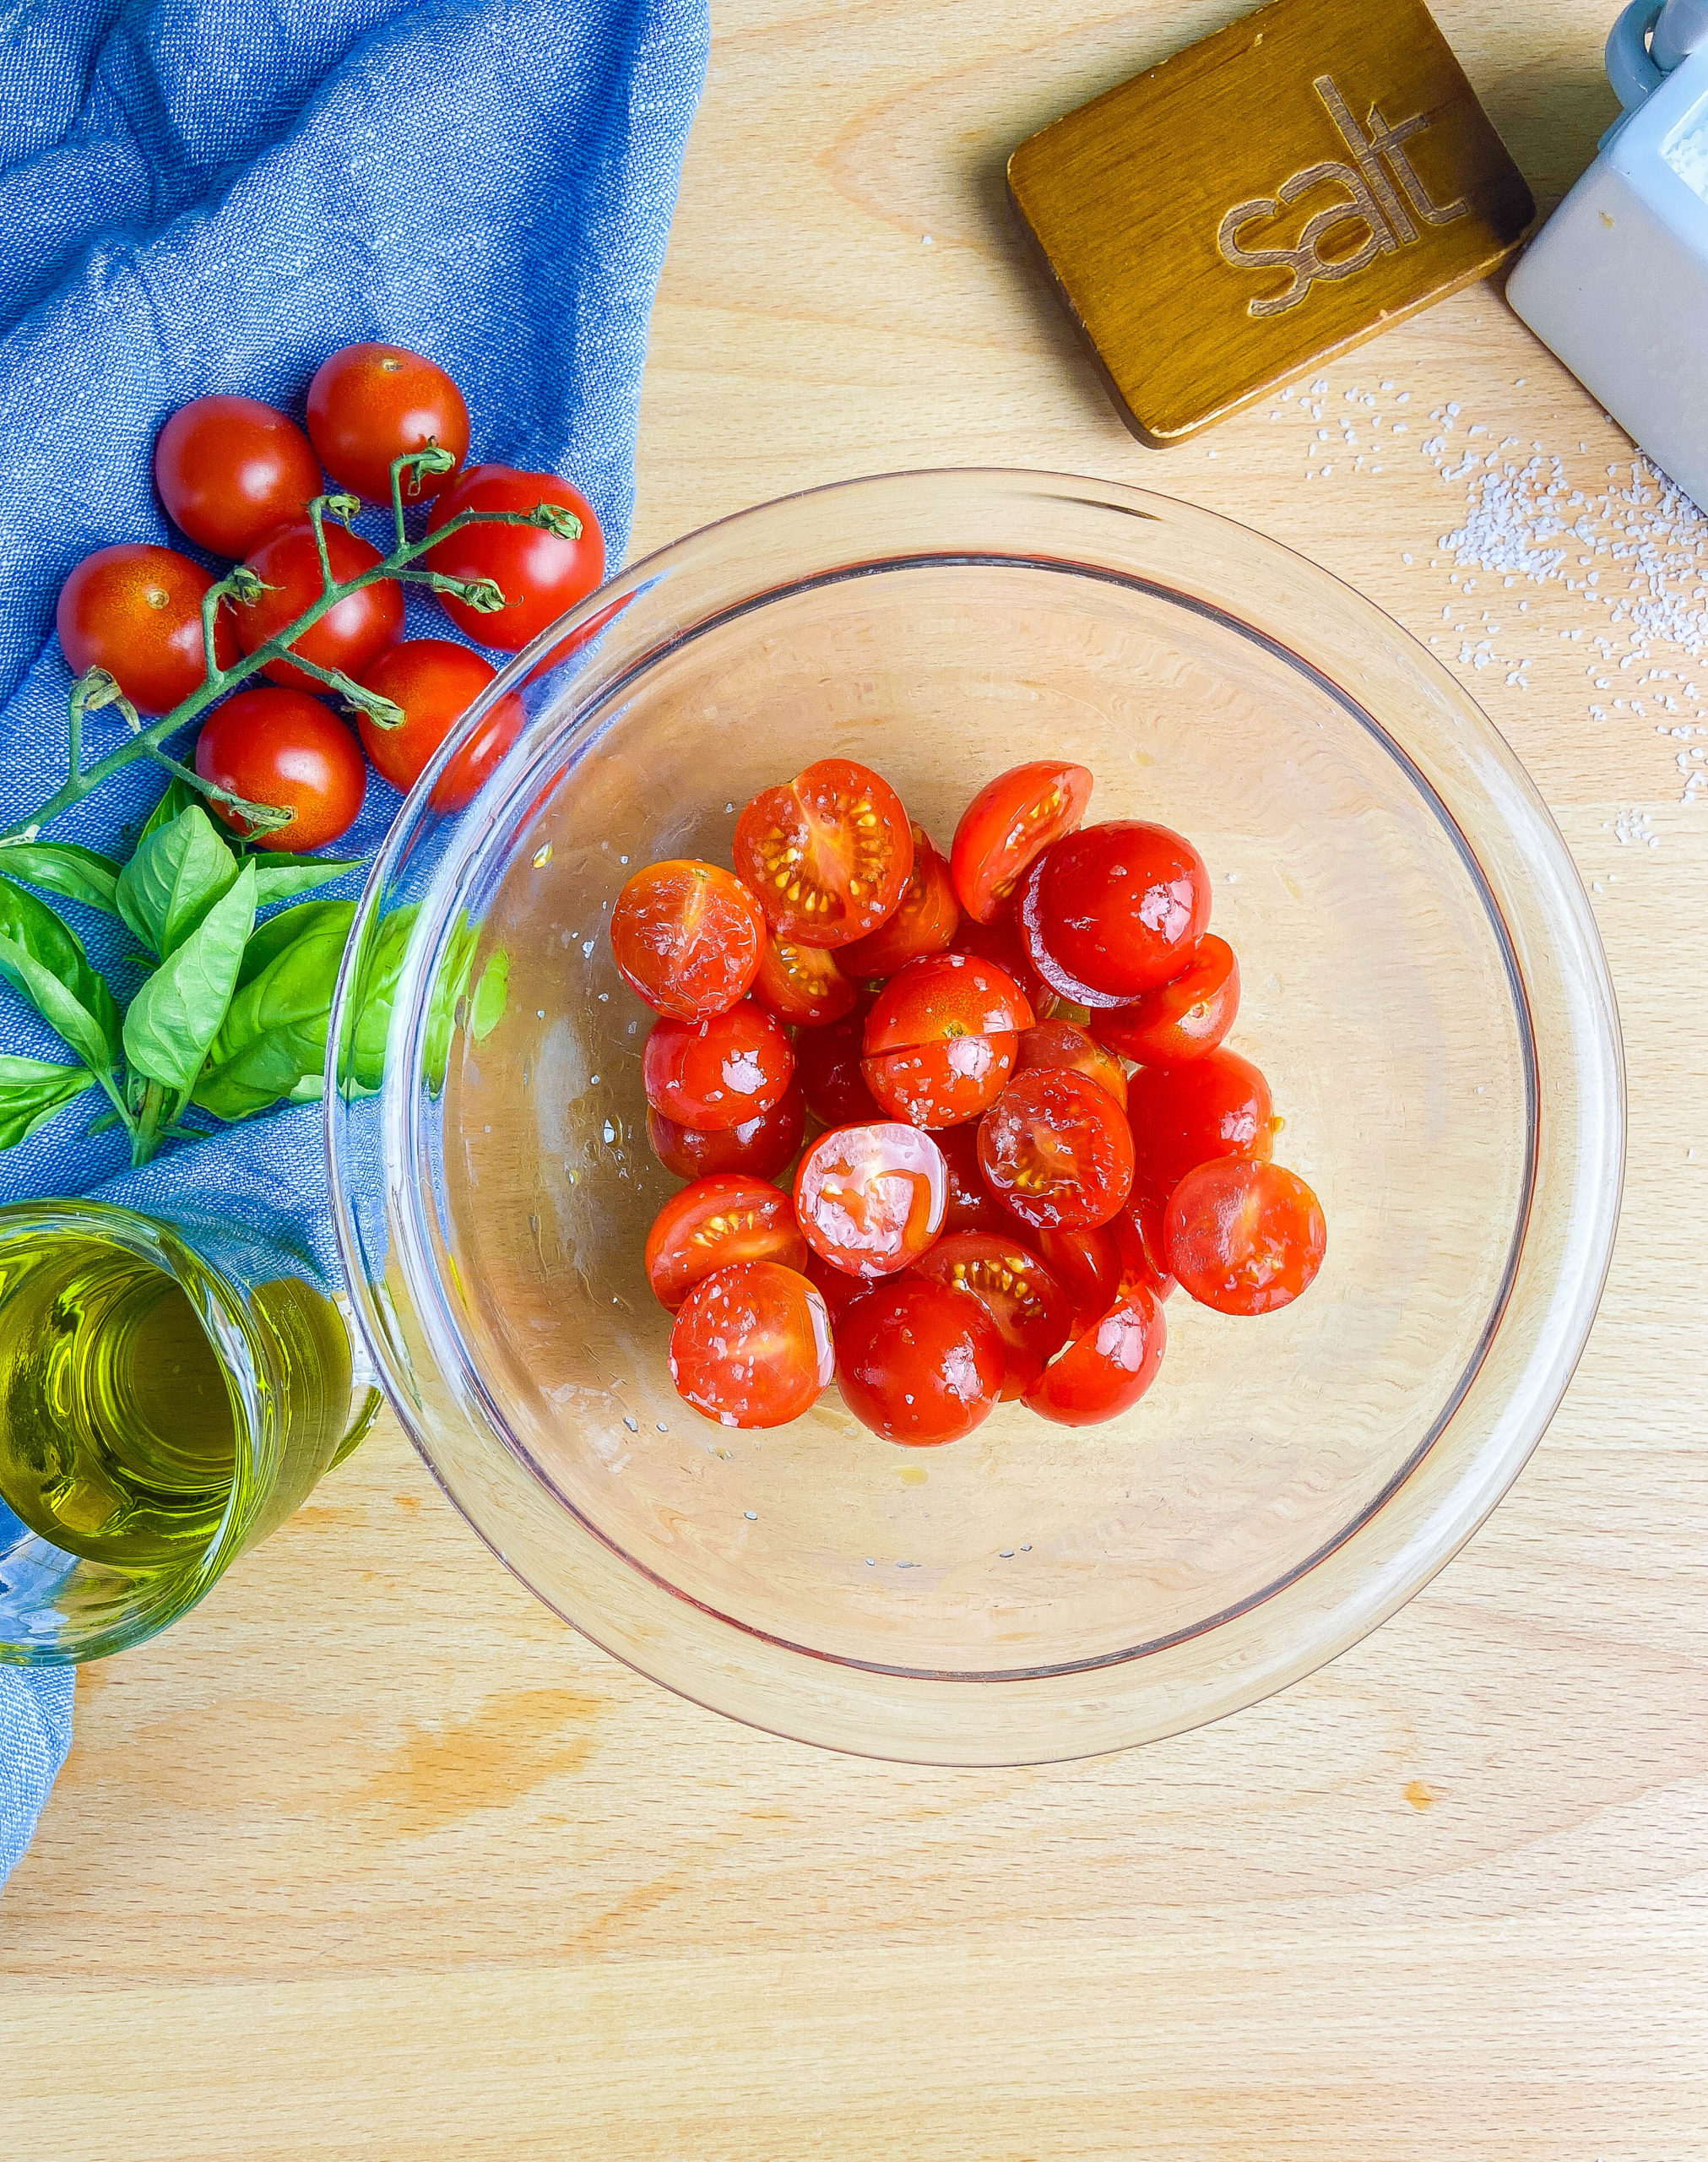 Overhead photo of cherry tomatoes in a glass bowl on a wooden cutting board. Olive oil, basil and tomatoes on a blue towel.